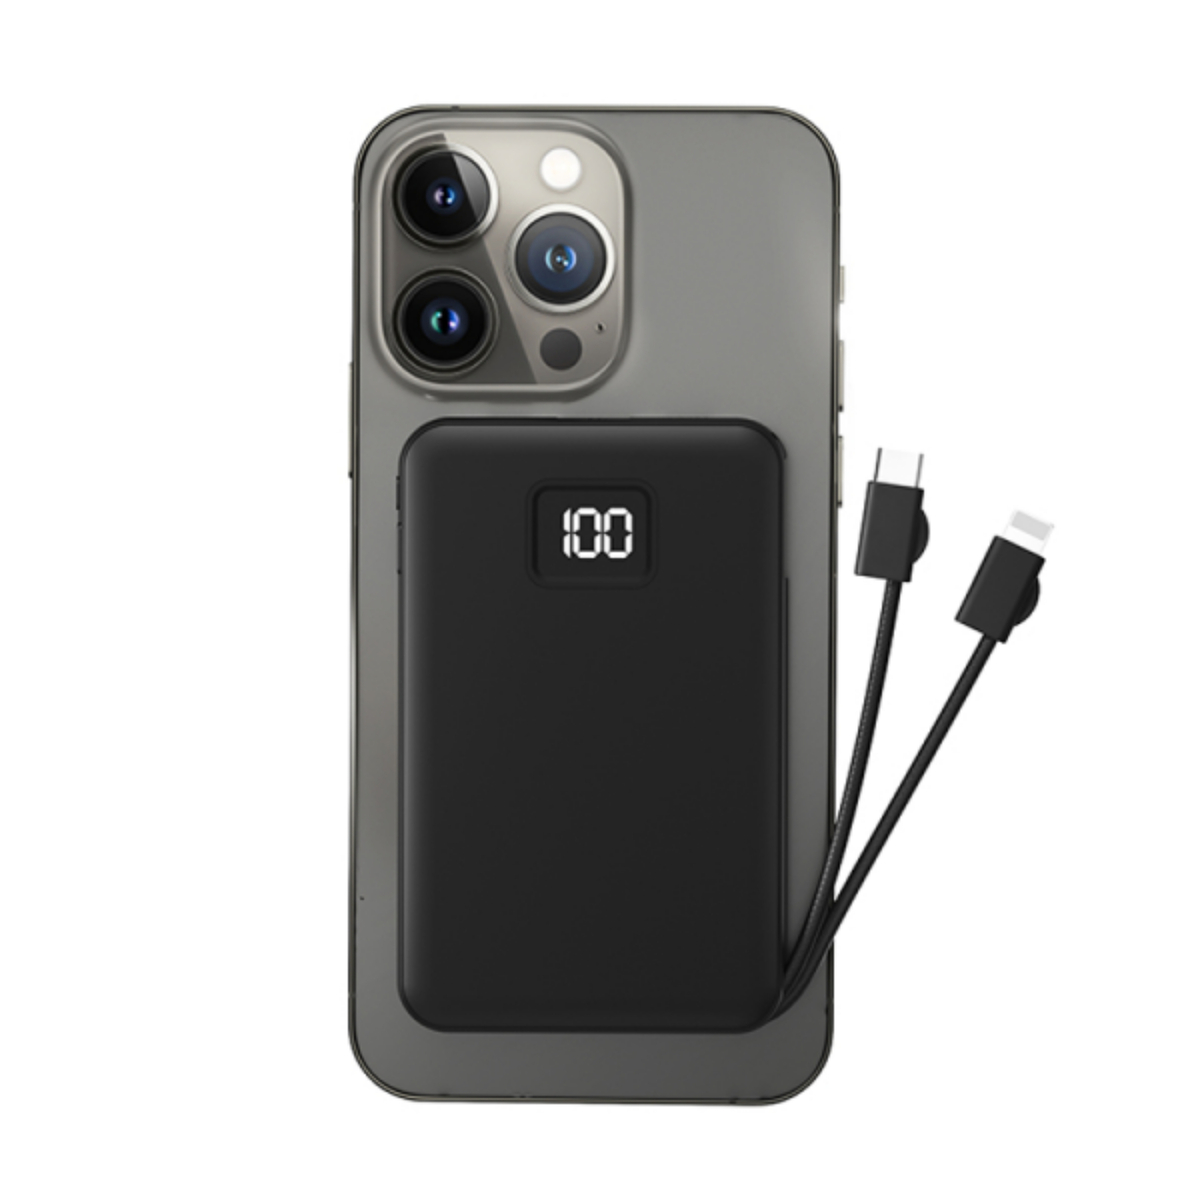 Wiwu Power Bank with Built-in Cable, 22.5 W, 10000 mAh, Black, JC-15